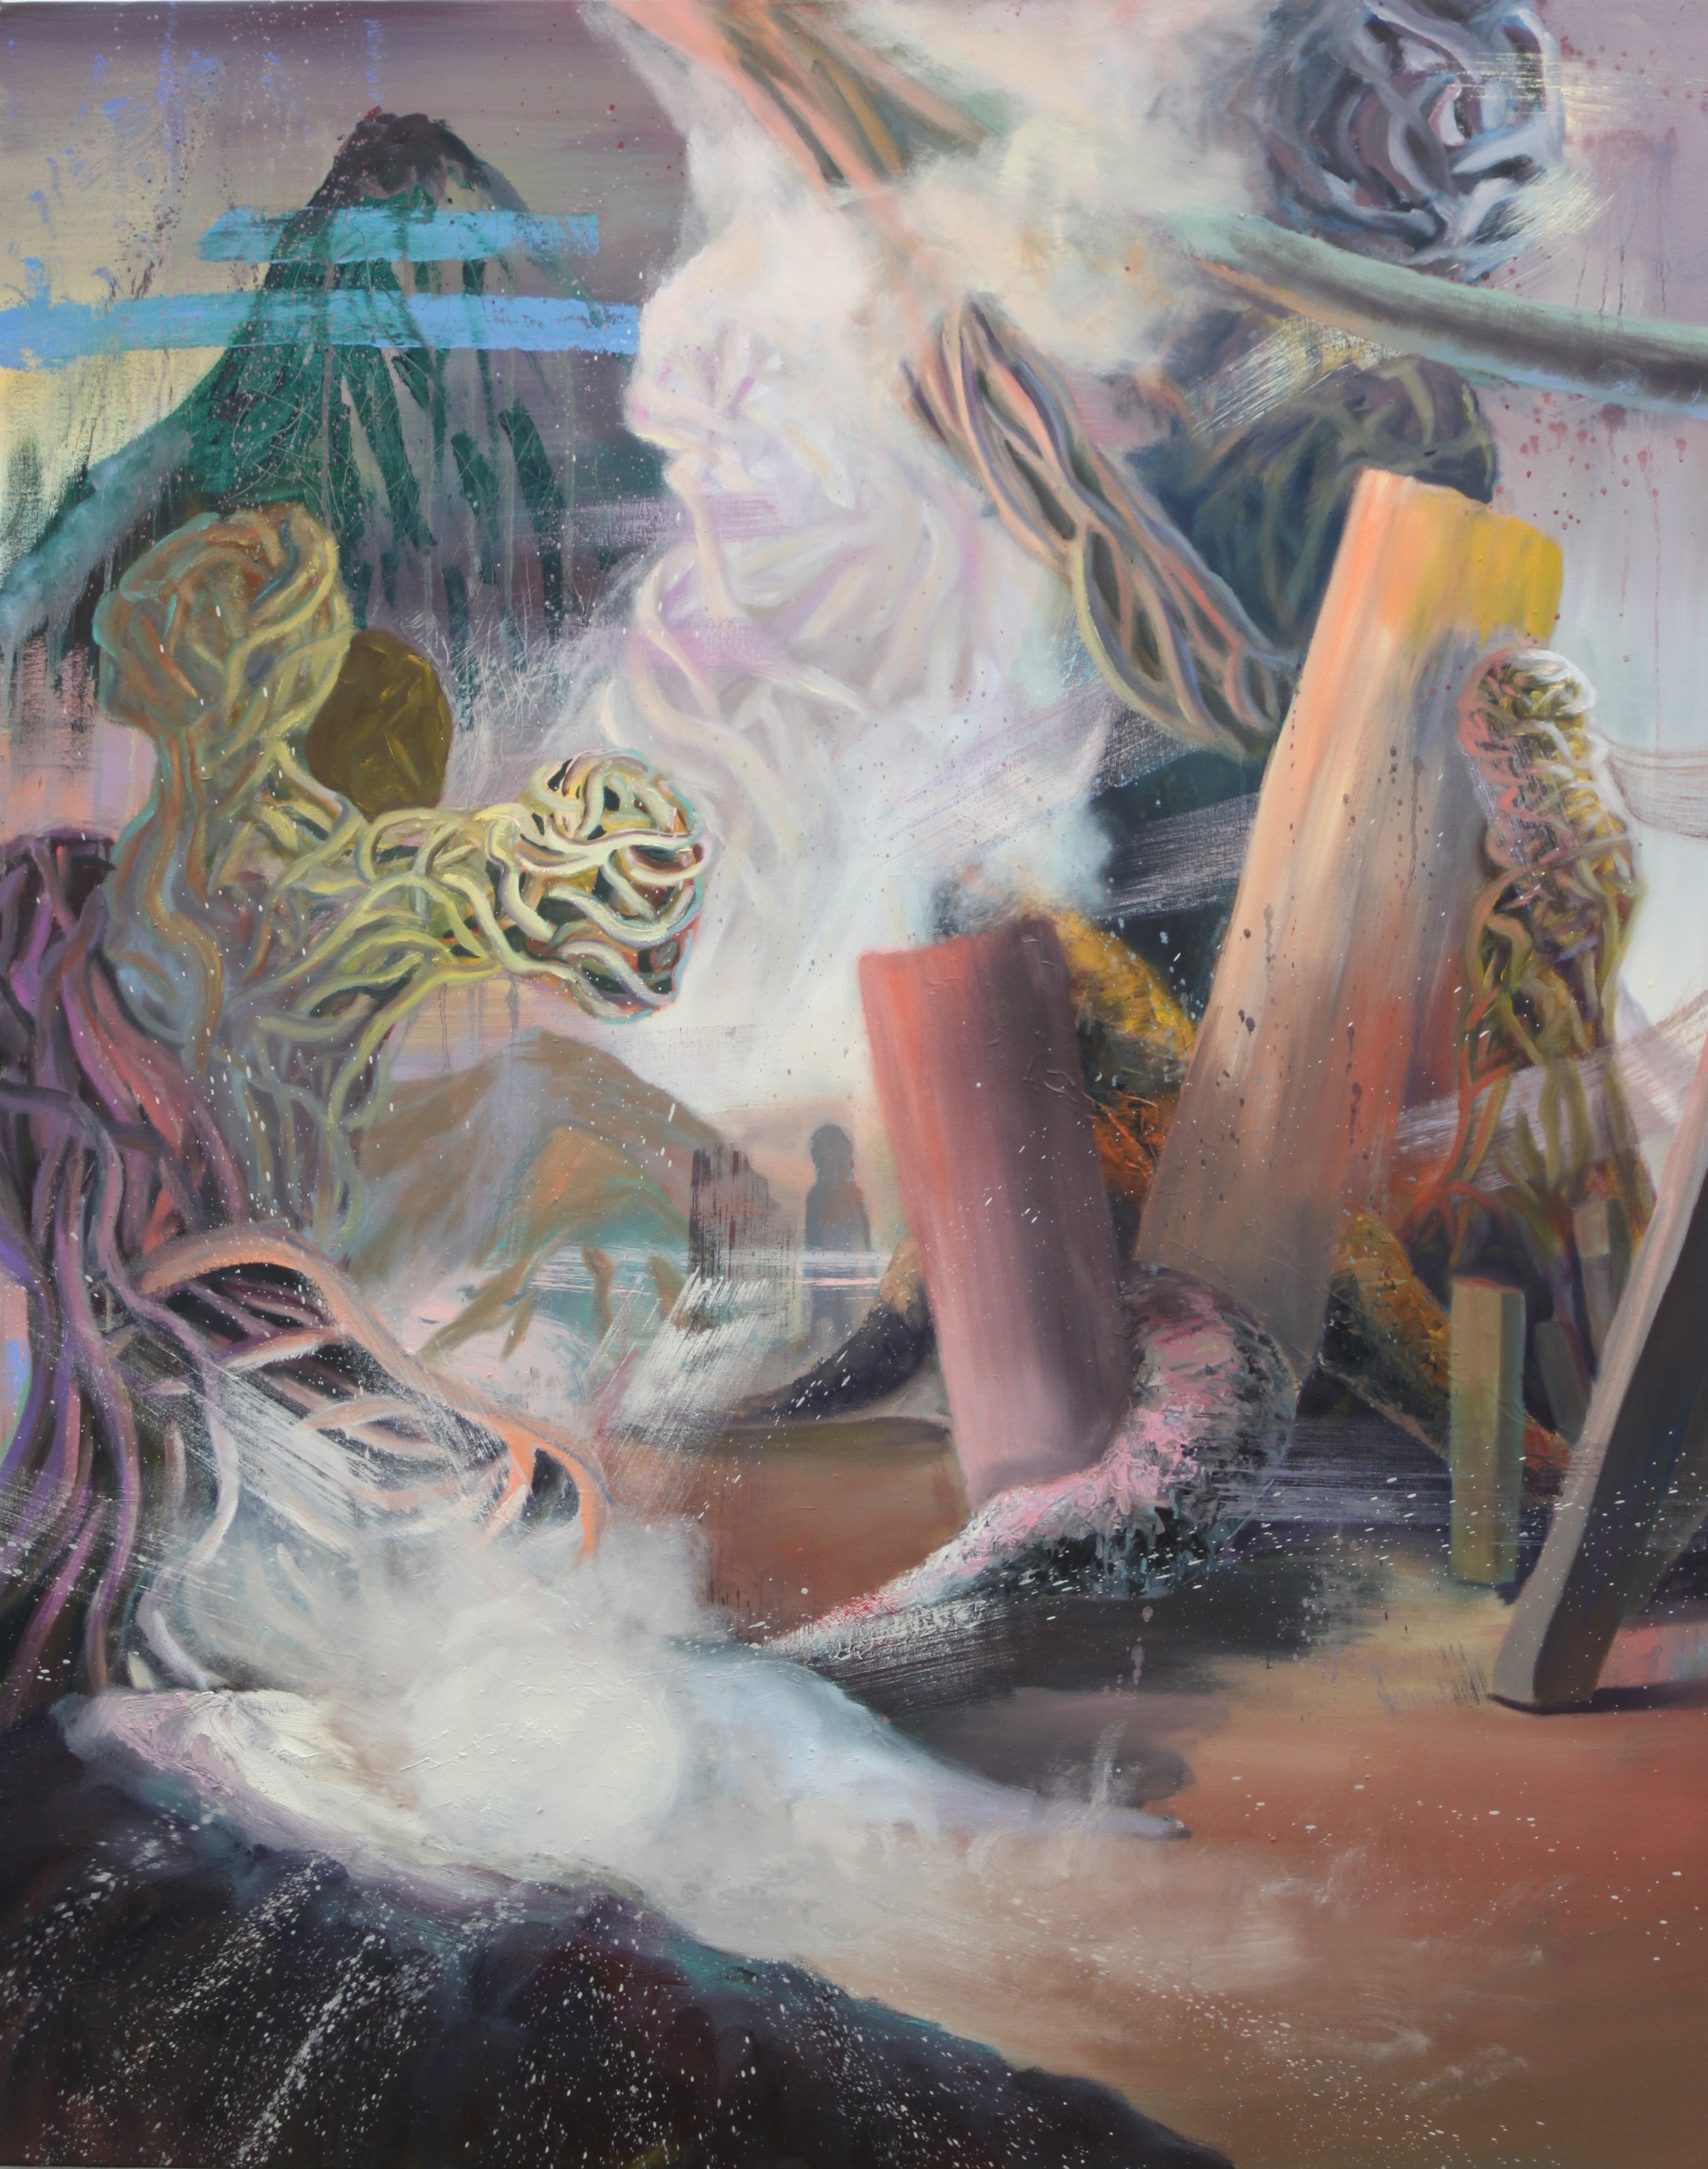   Entangled: 5   Oil Paint on Canvas  48x60 inches  2015 